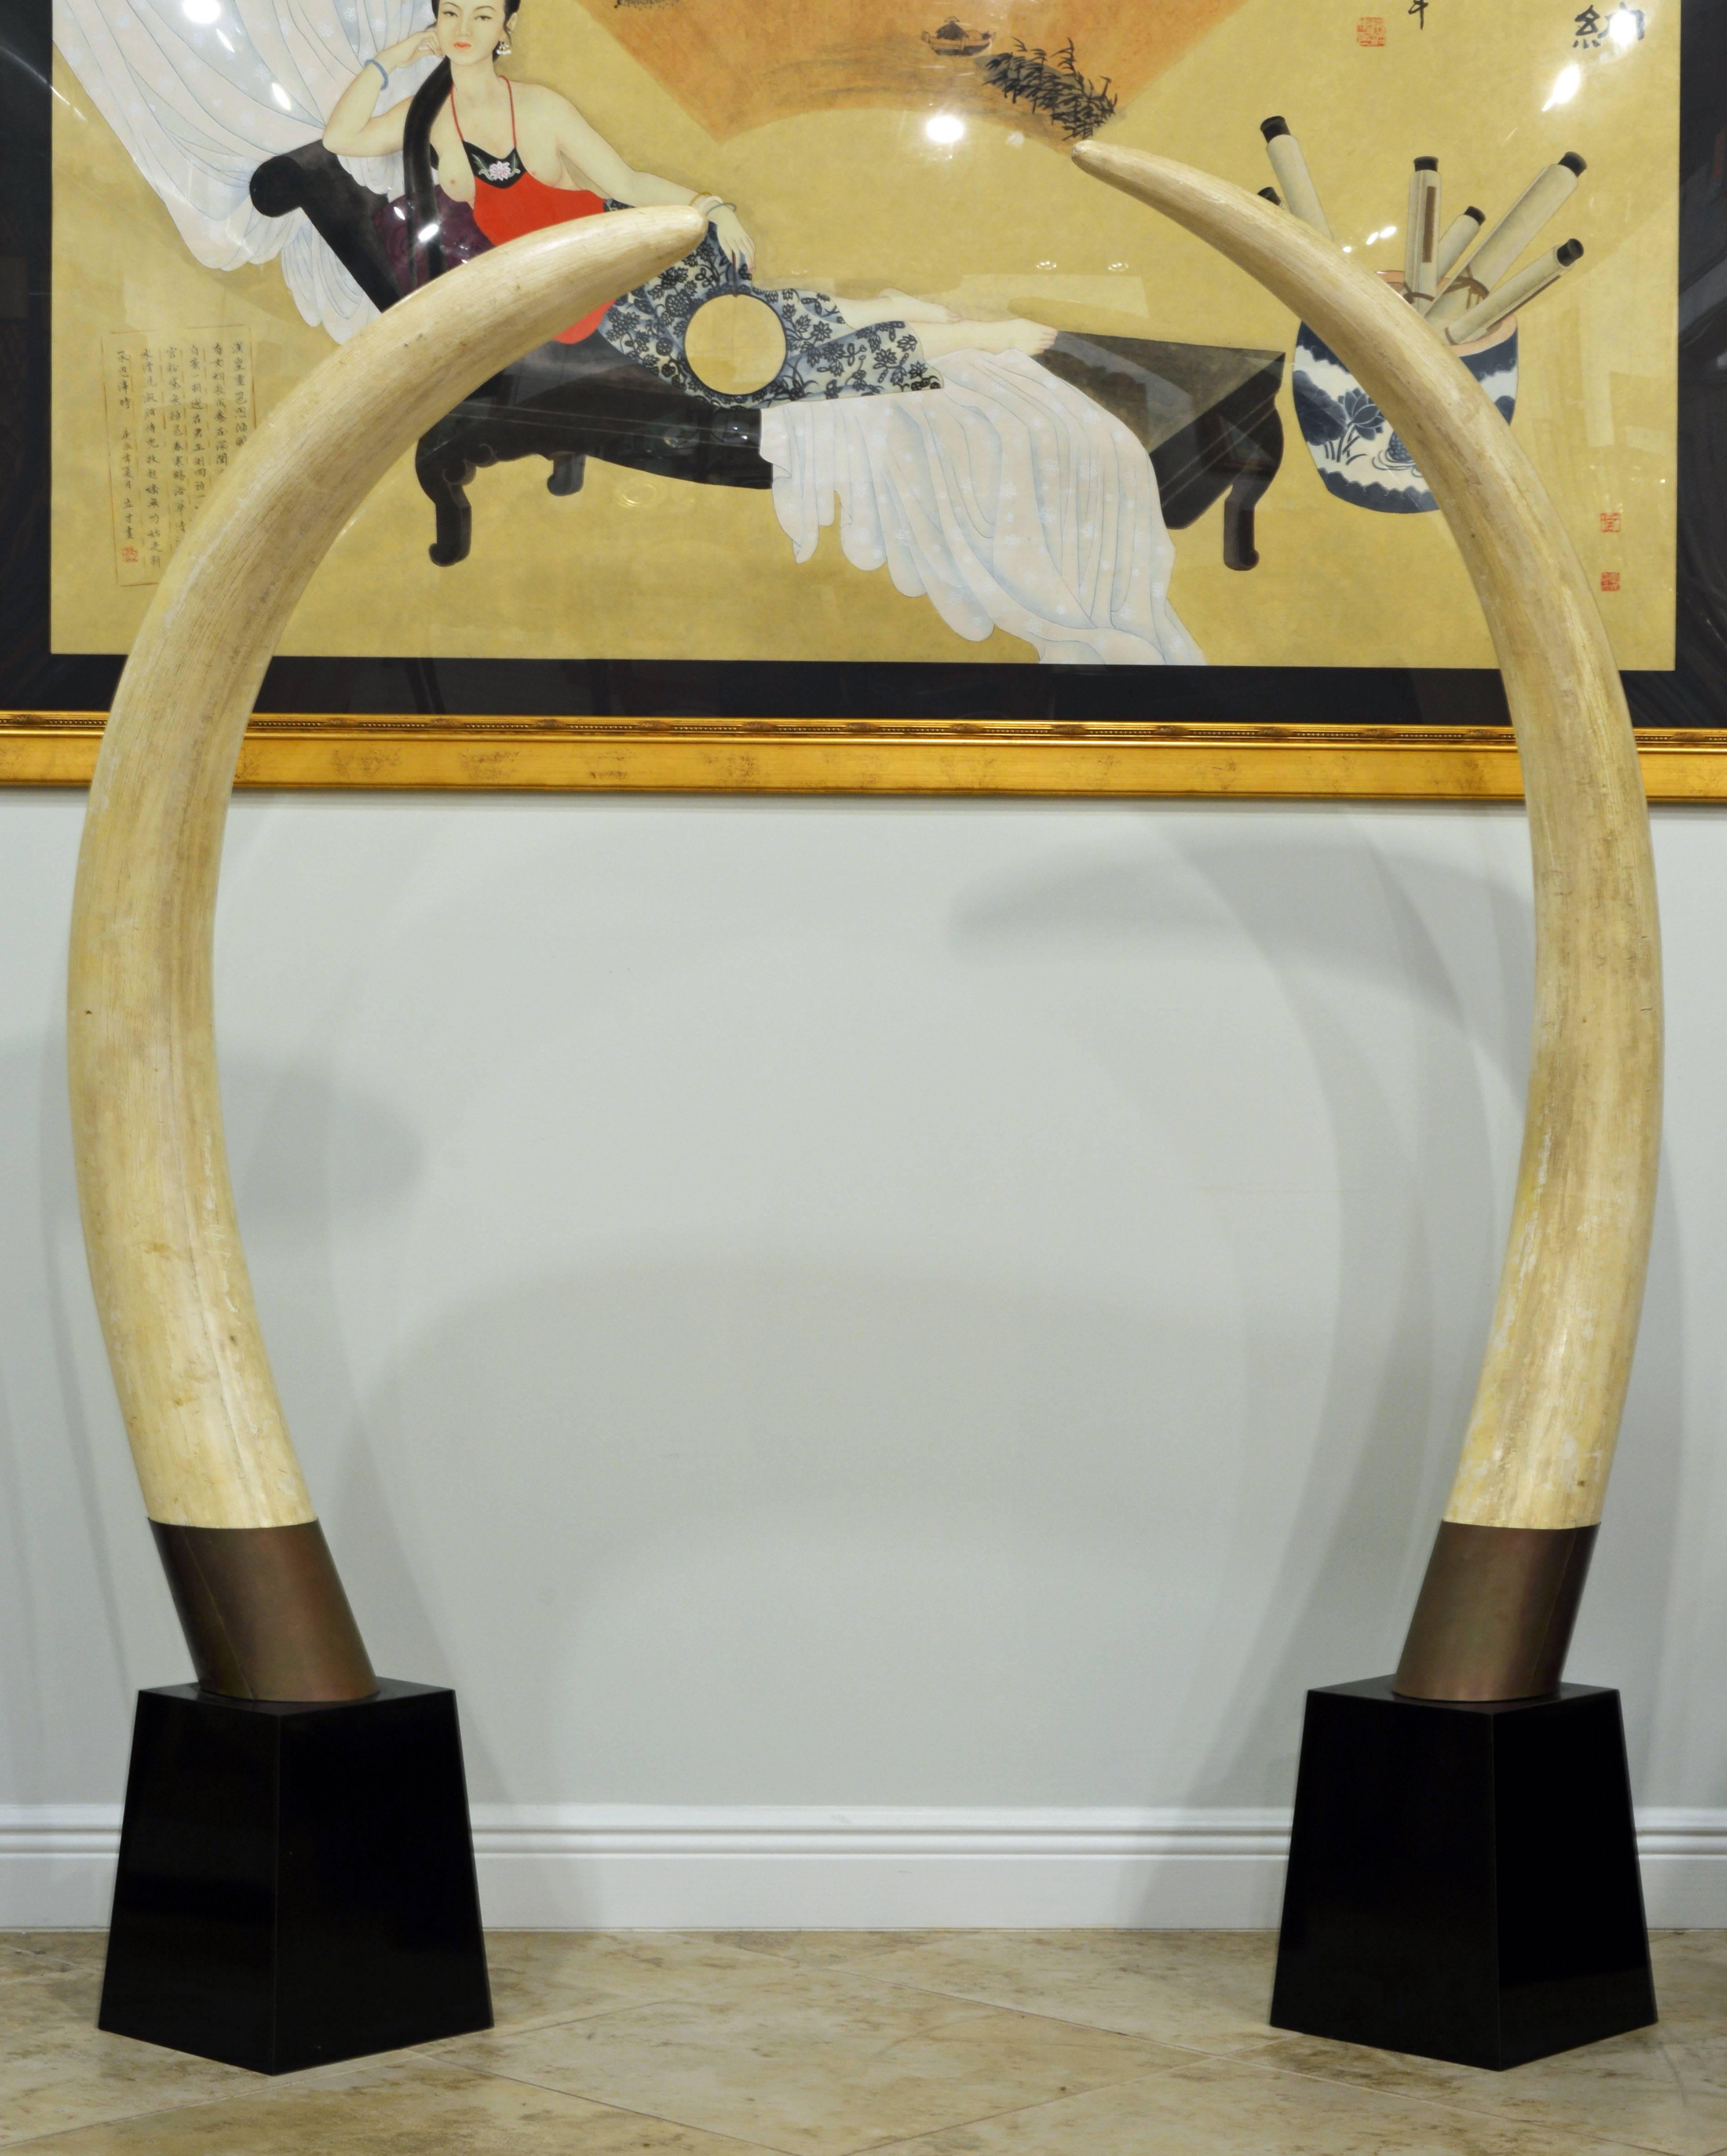 Standing 68 inches tall these faux elephant tusks make a great and environmentally sound statement. They are slightly different in shape and there is reason to believe that this pair is actually a replica of one animal's set of tusks since those are